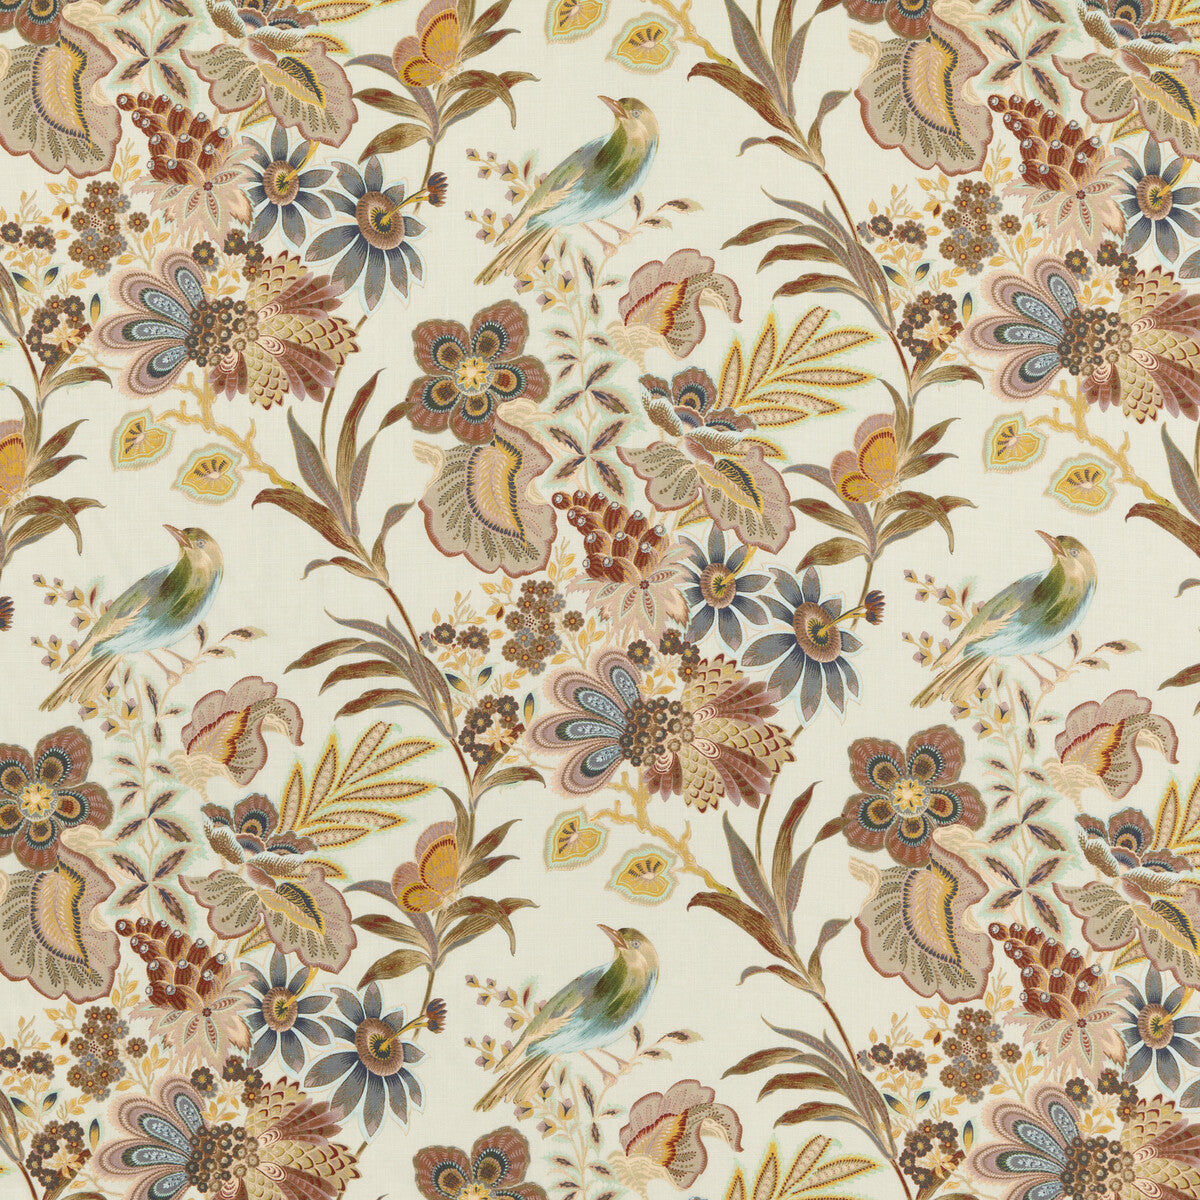 Artist Garden fabric in spice color - pattern FD303.T30.0 - by Mulberry in the Modern Country II collection